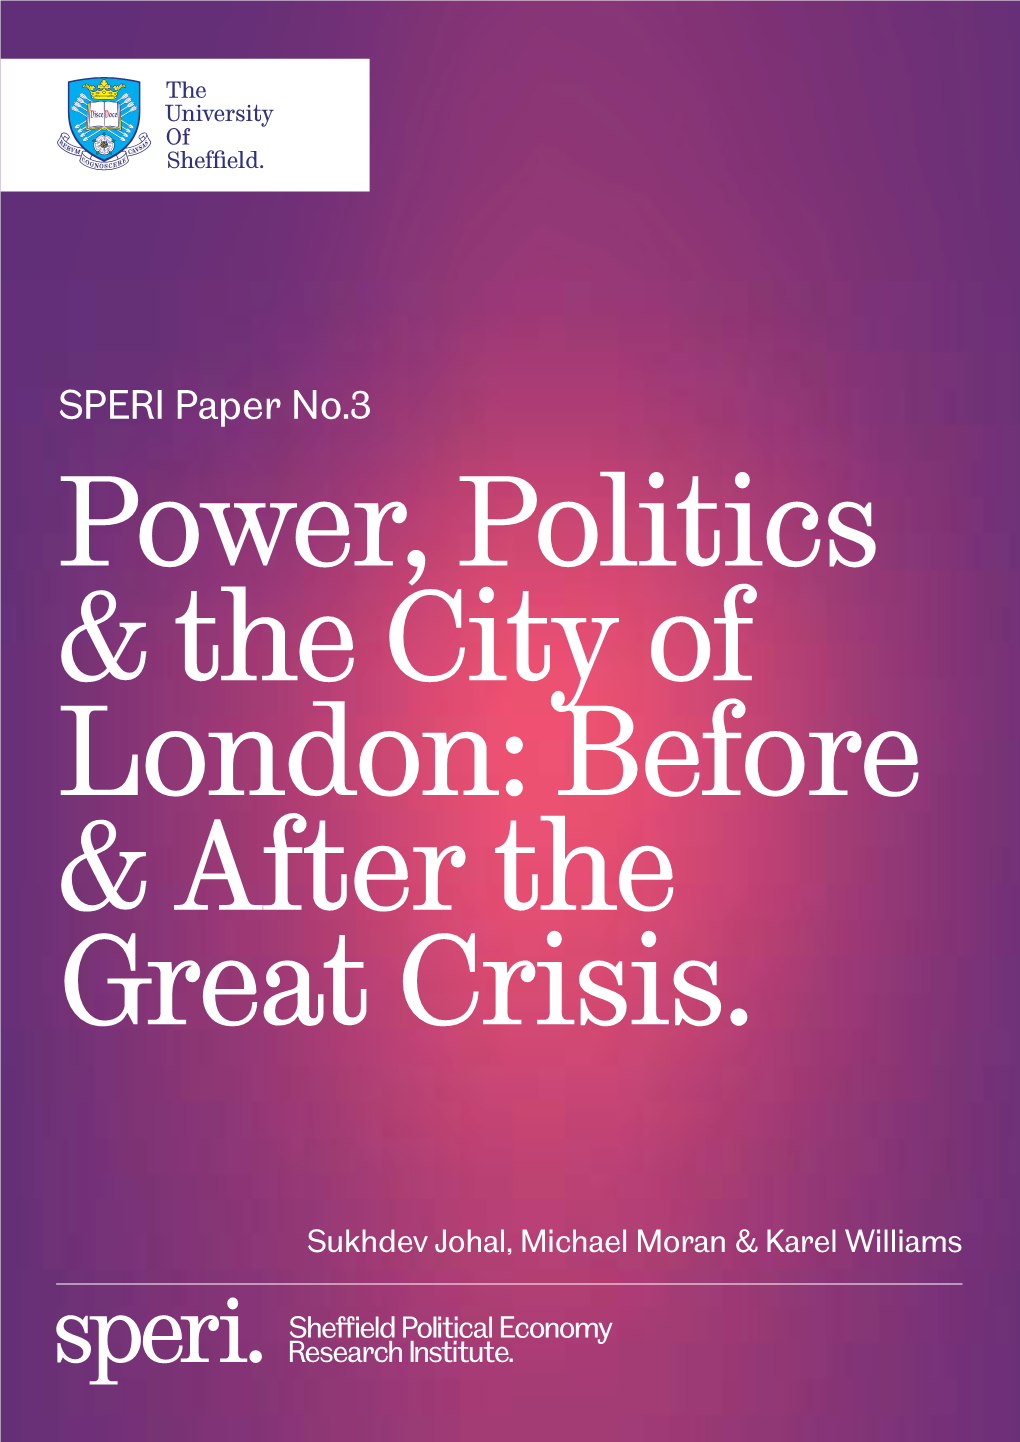 SPERI Paper No.3 Power, Politics & the City of London: Before & After the Great Crisis